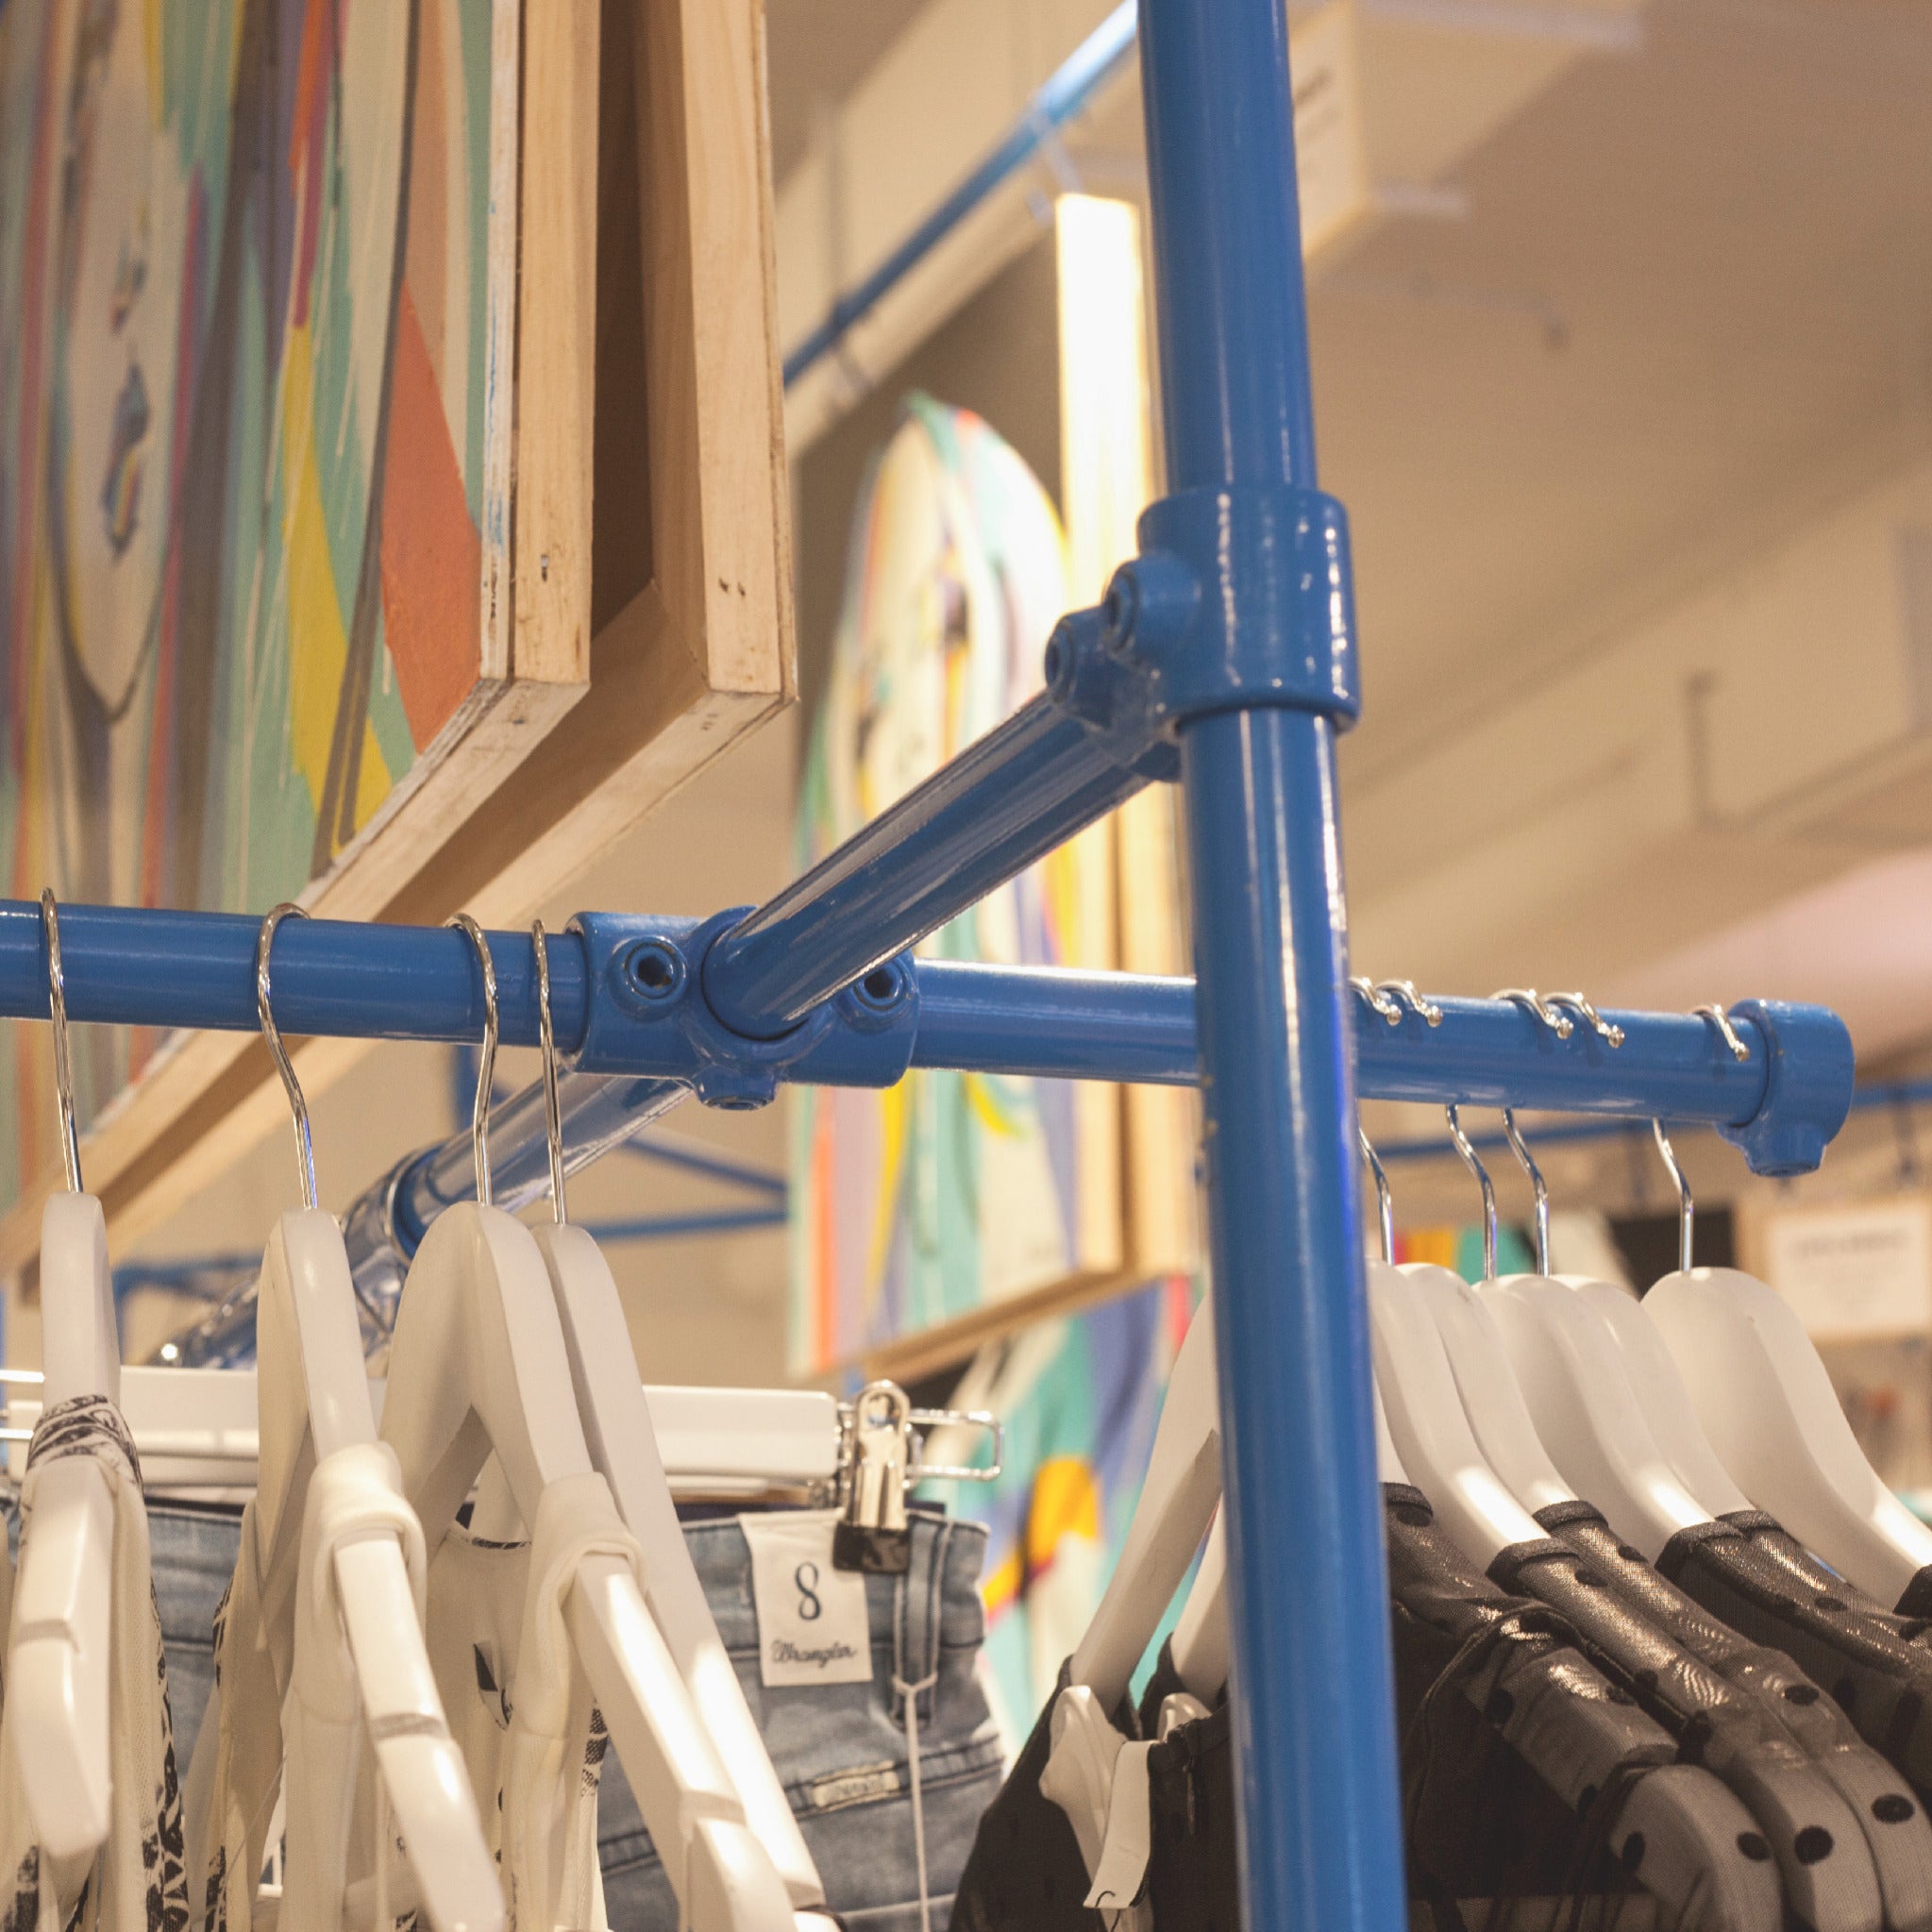 Clothes hanging from Rack built of Tubclamp Fittings